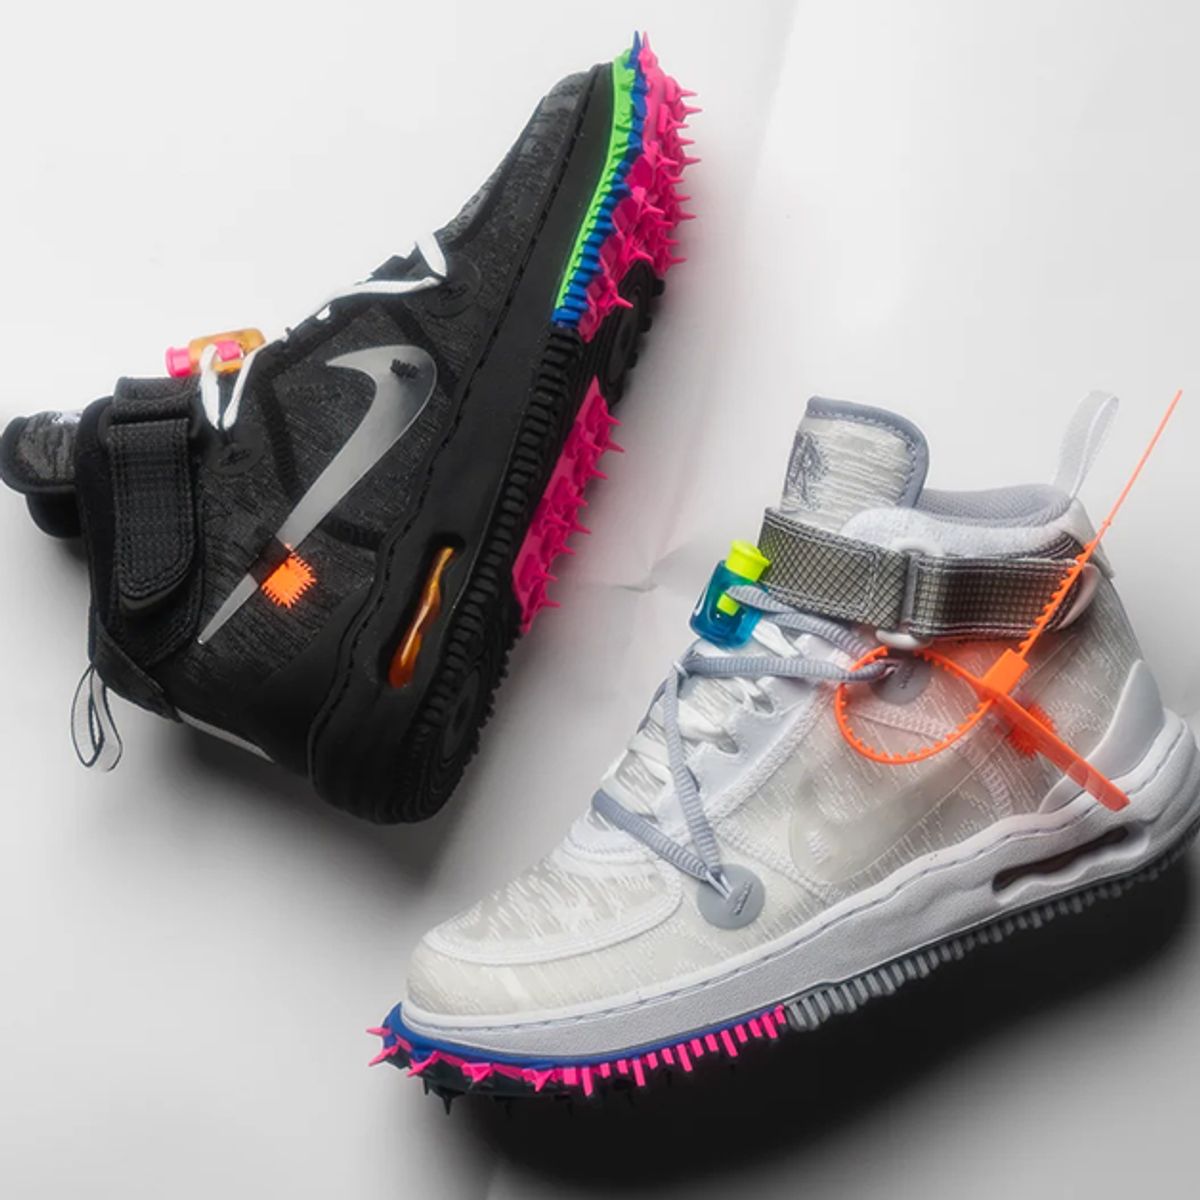 The Louis Vuitton x Off-White x Nike Air Force 1 Revealed In Several Colors